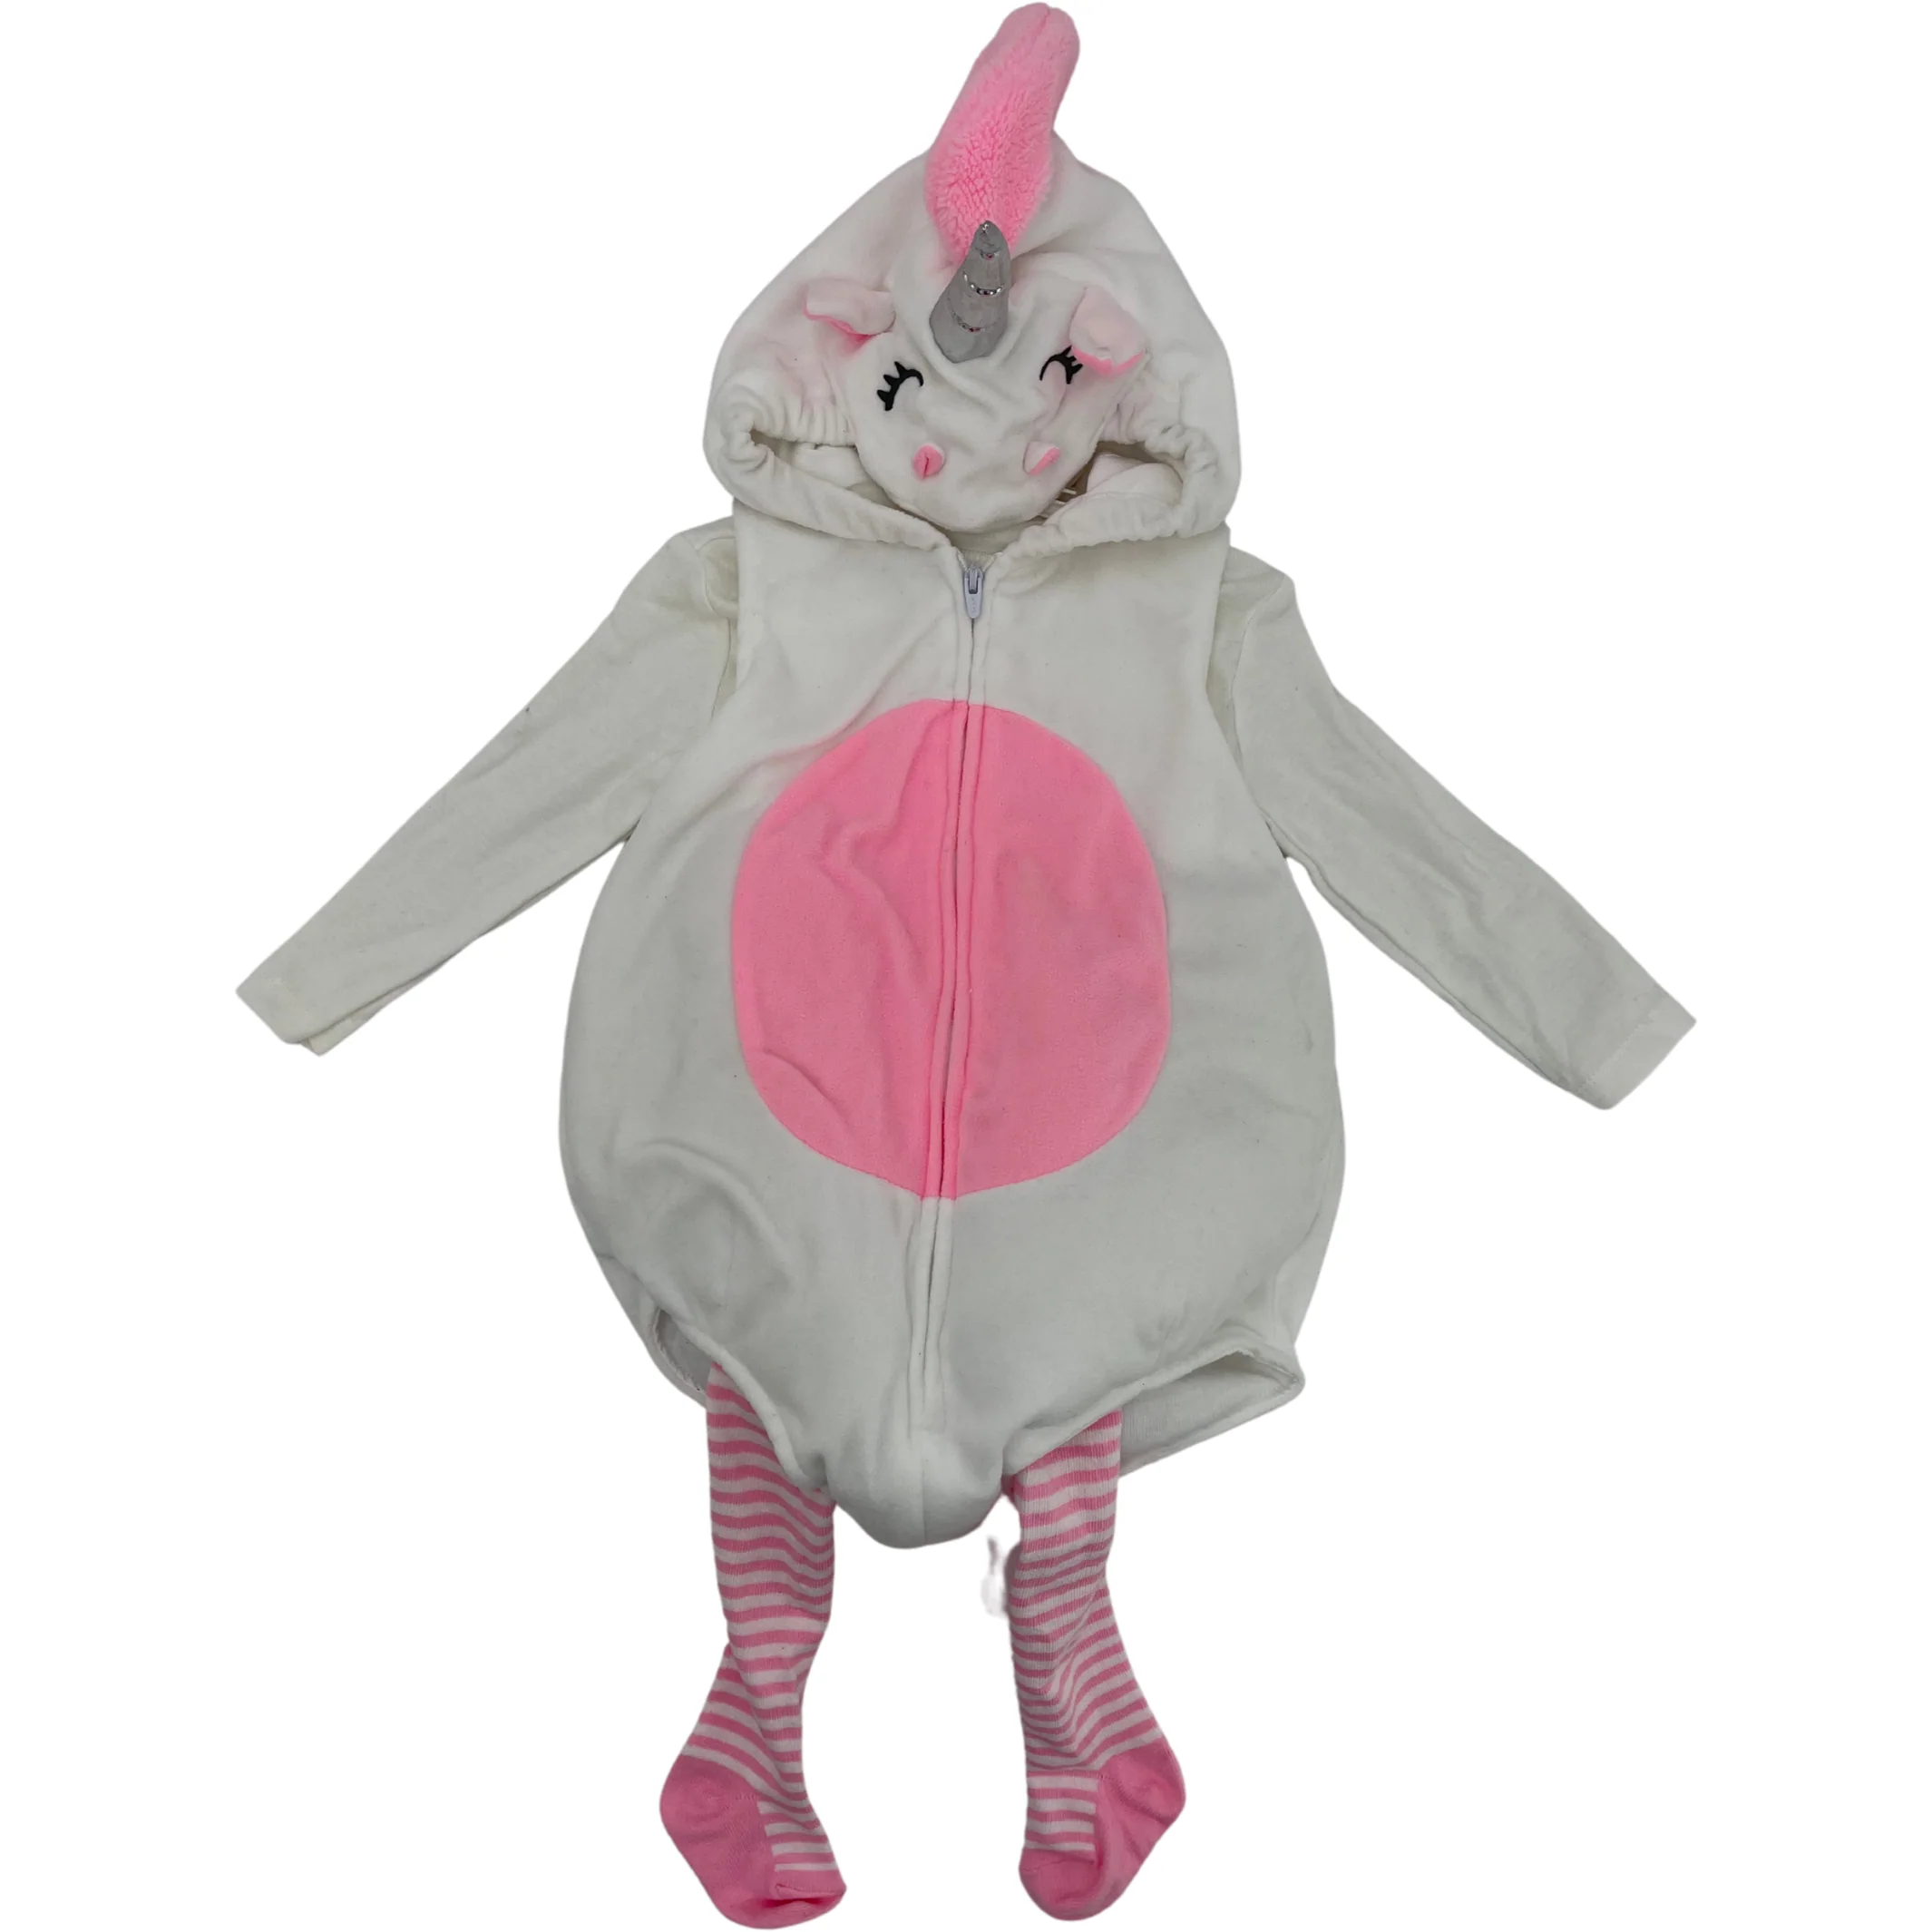 Carter's Infant's Halloween Costume / Unicorn / White and Pink / Size 18months